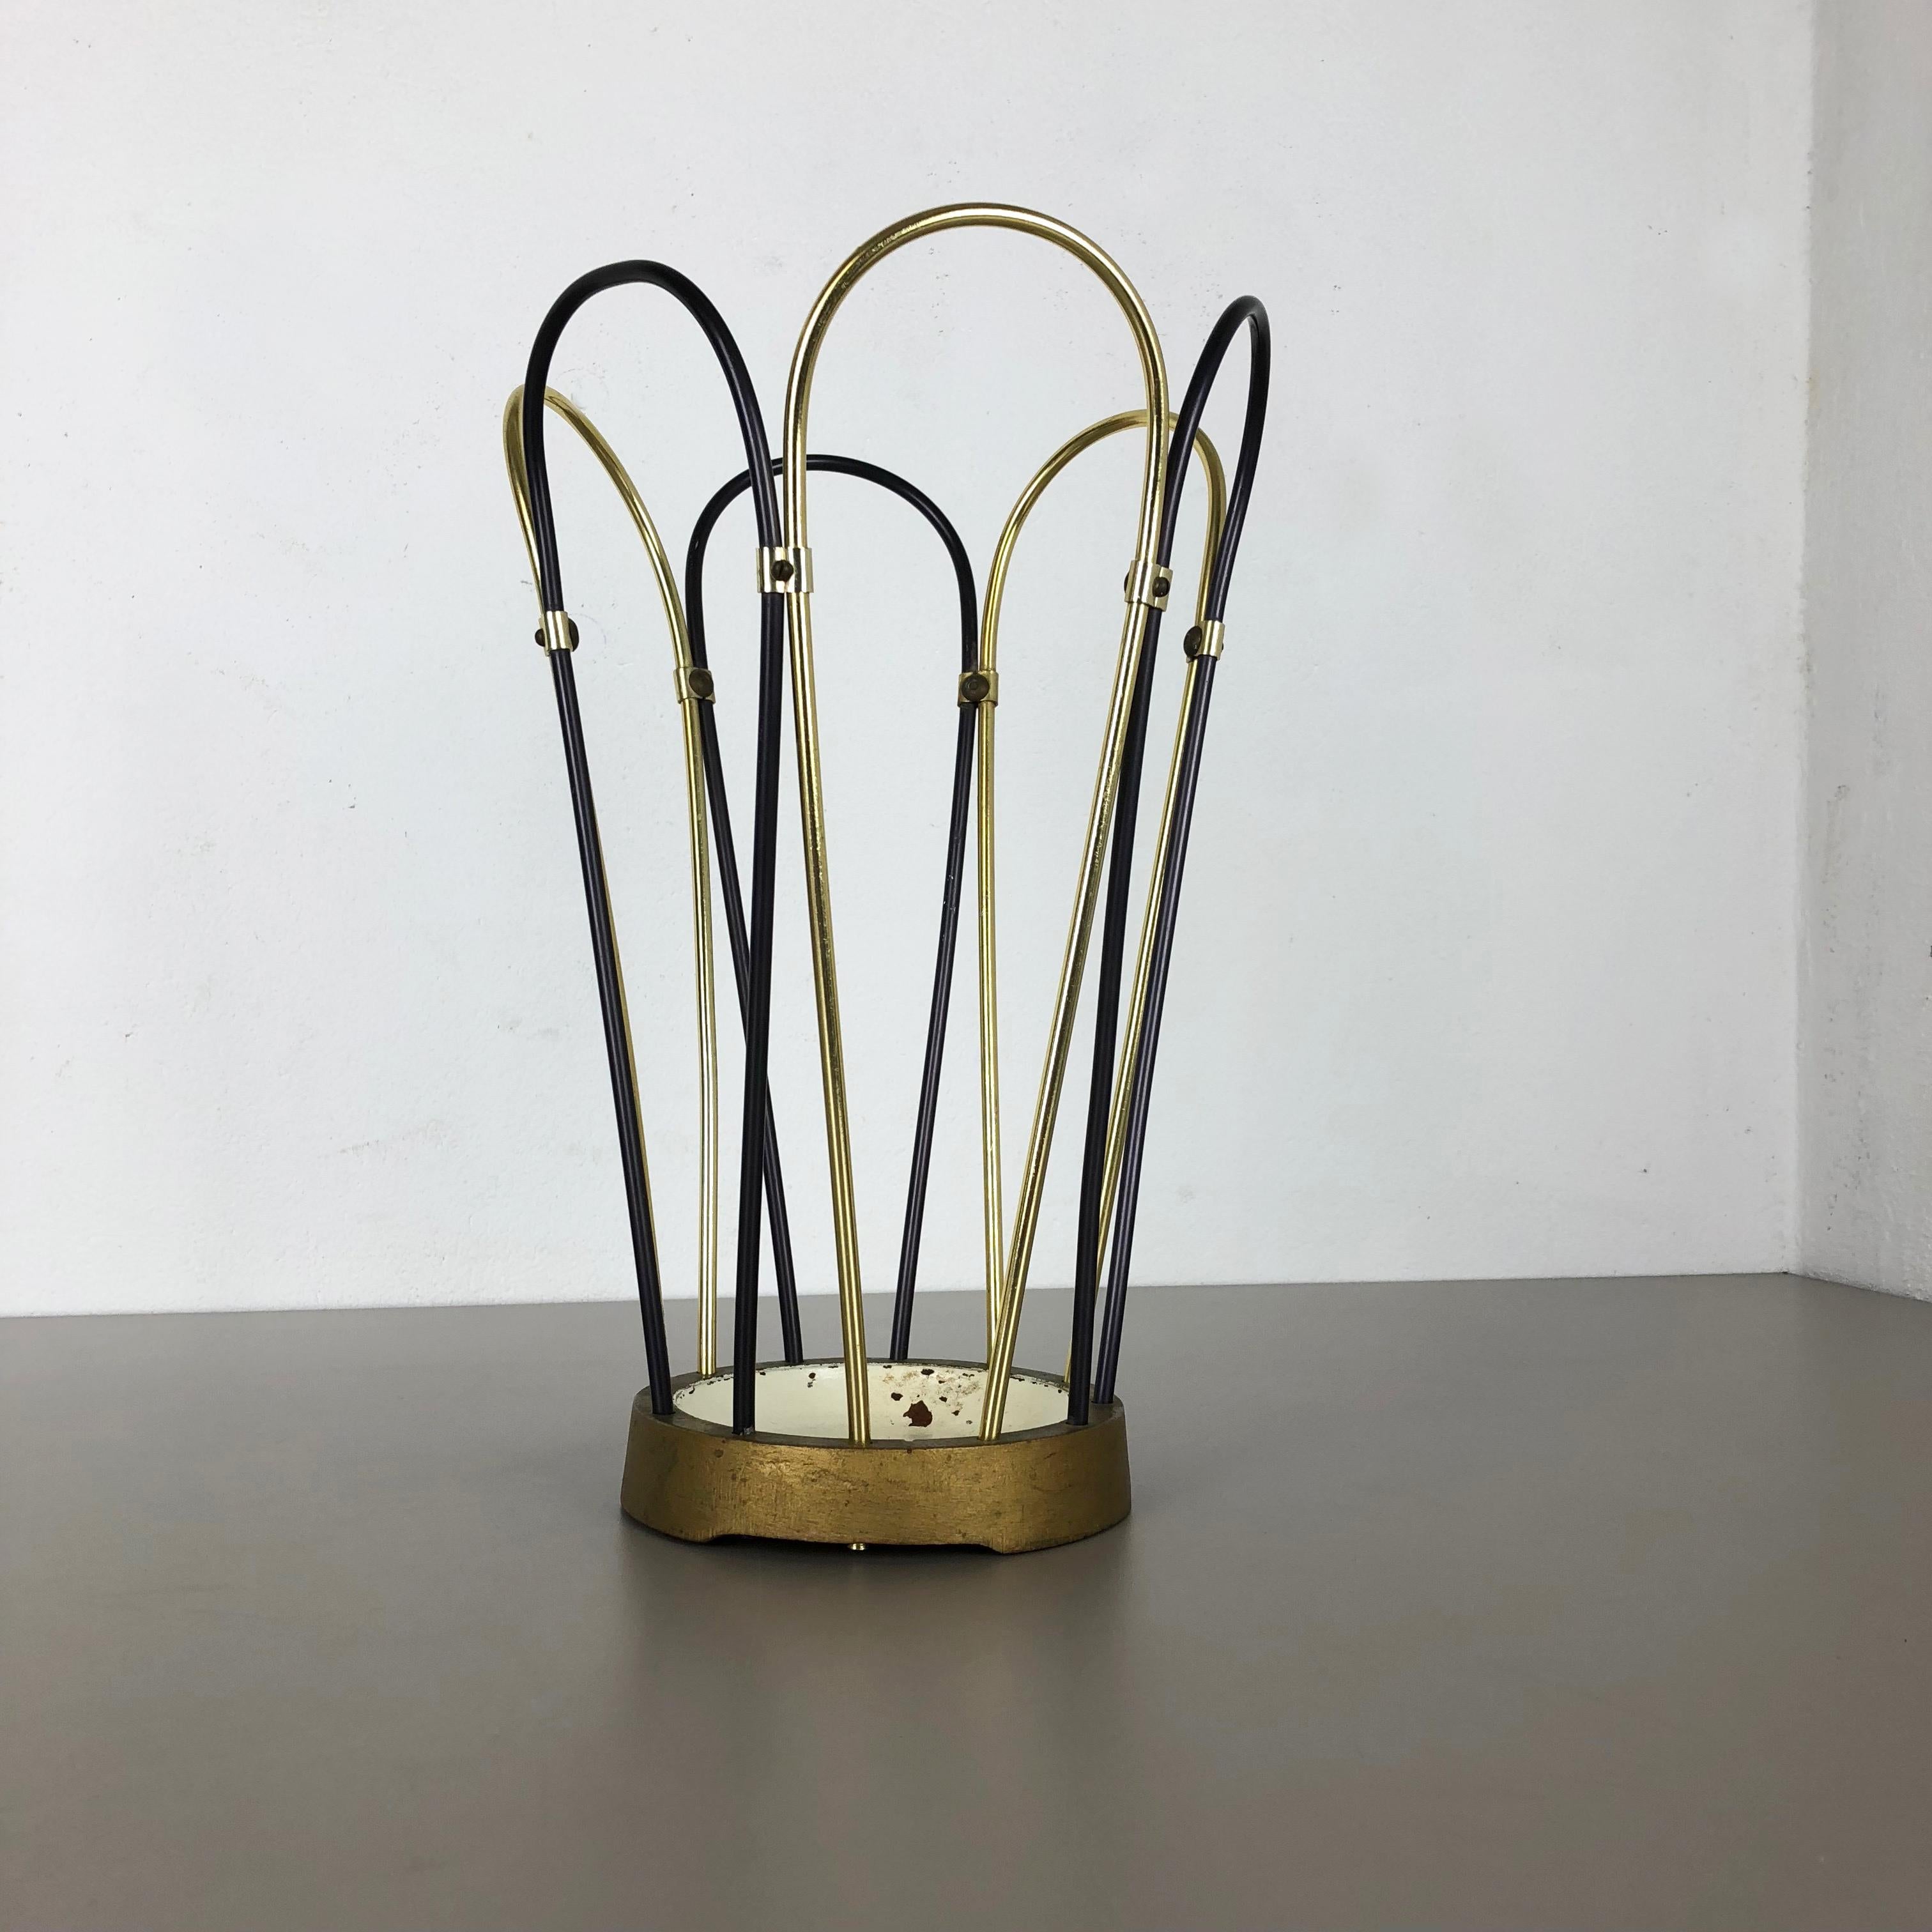 Article:

Bauhaus umbrella stand


Origin:

Germany


Age:

1950s


This original vintage Bauhaus style umbrella stand was produced in the 1950s in Germany. The brass colored top elements is made of aluminum, the black elements are